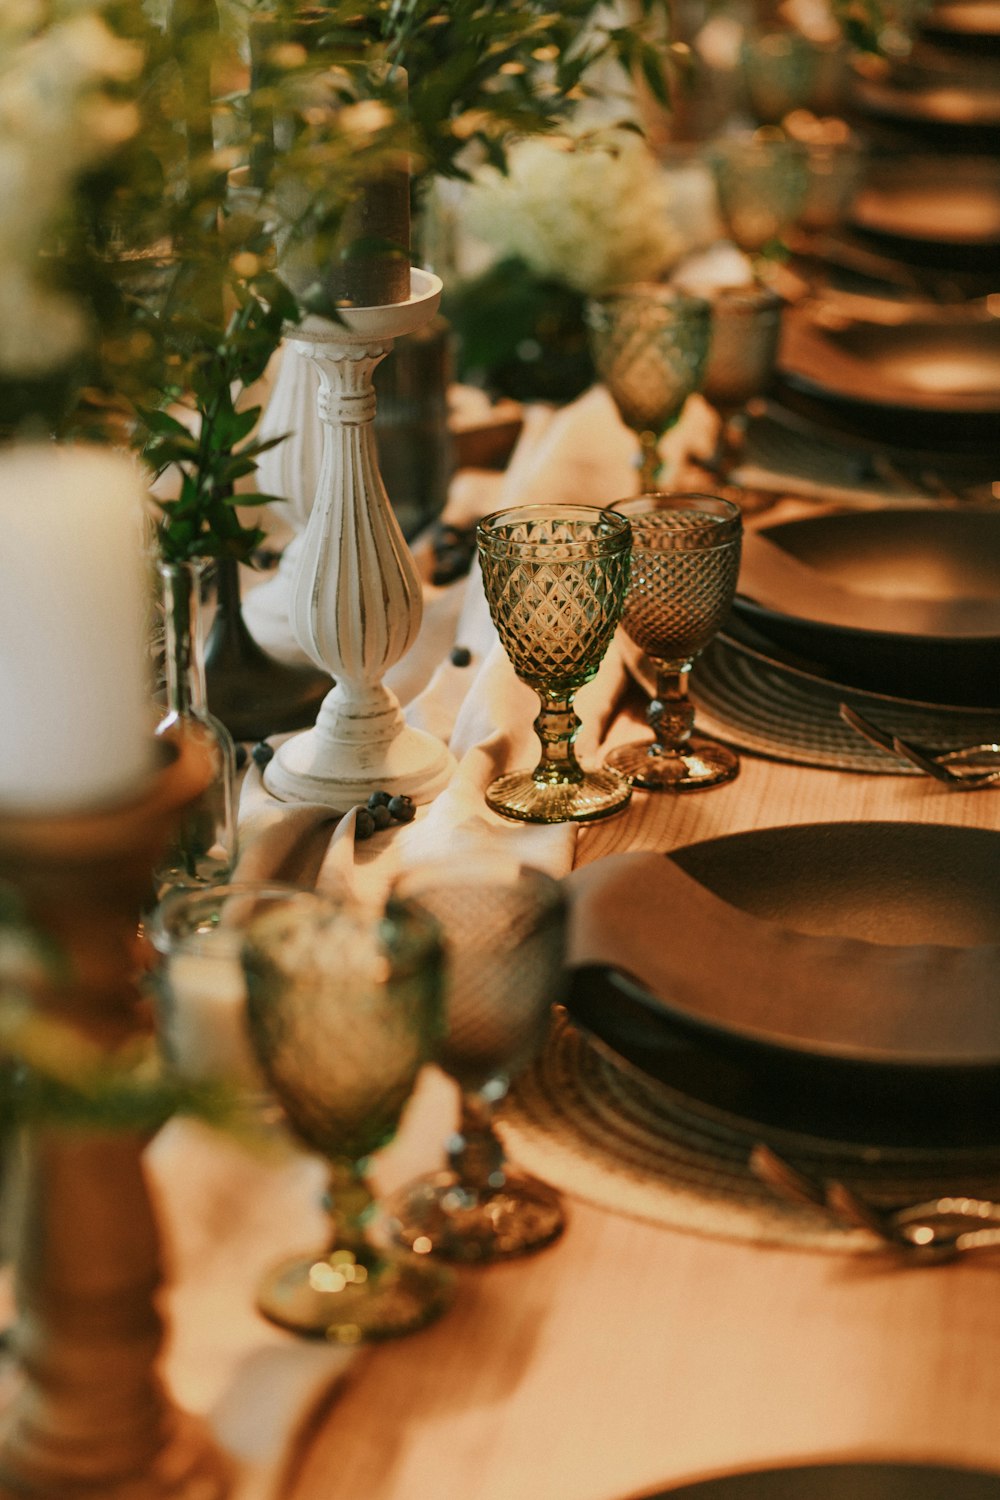 a table set for a formal dinner with plates and vases